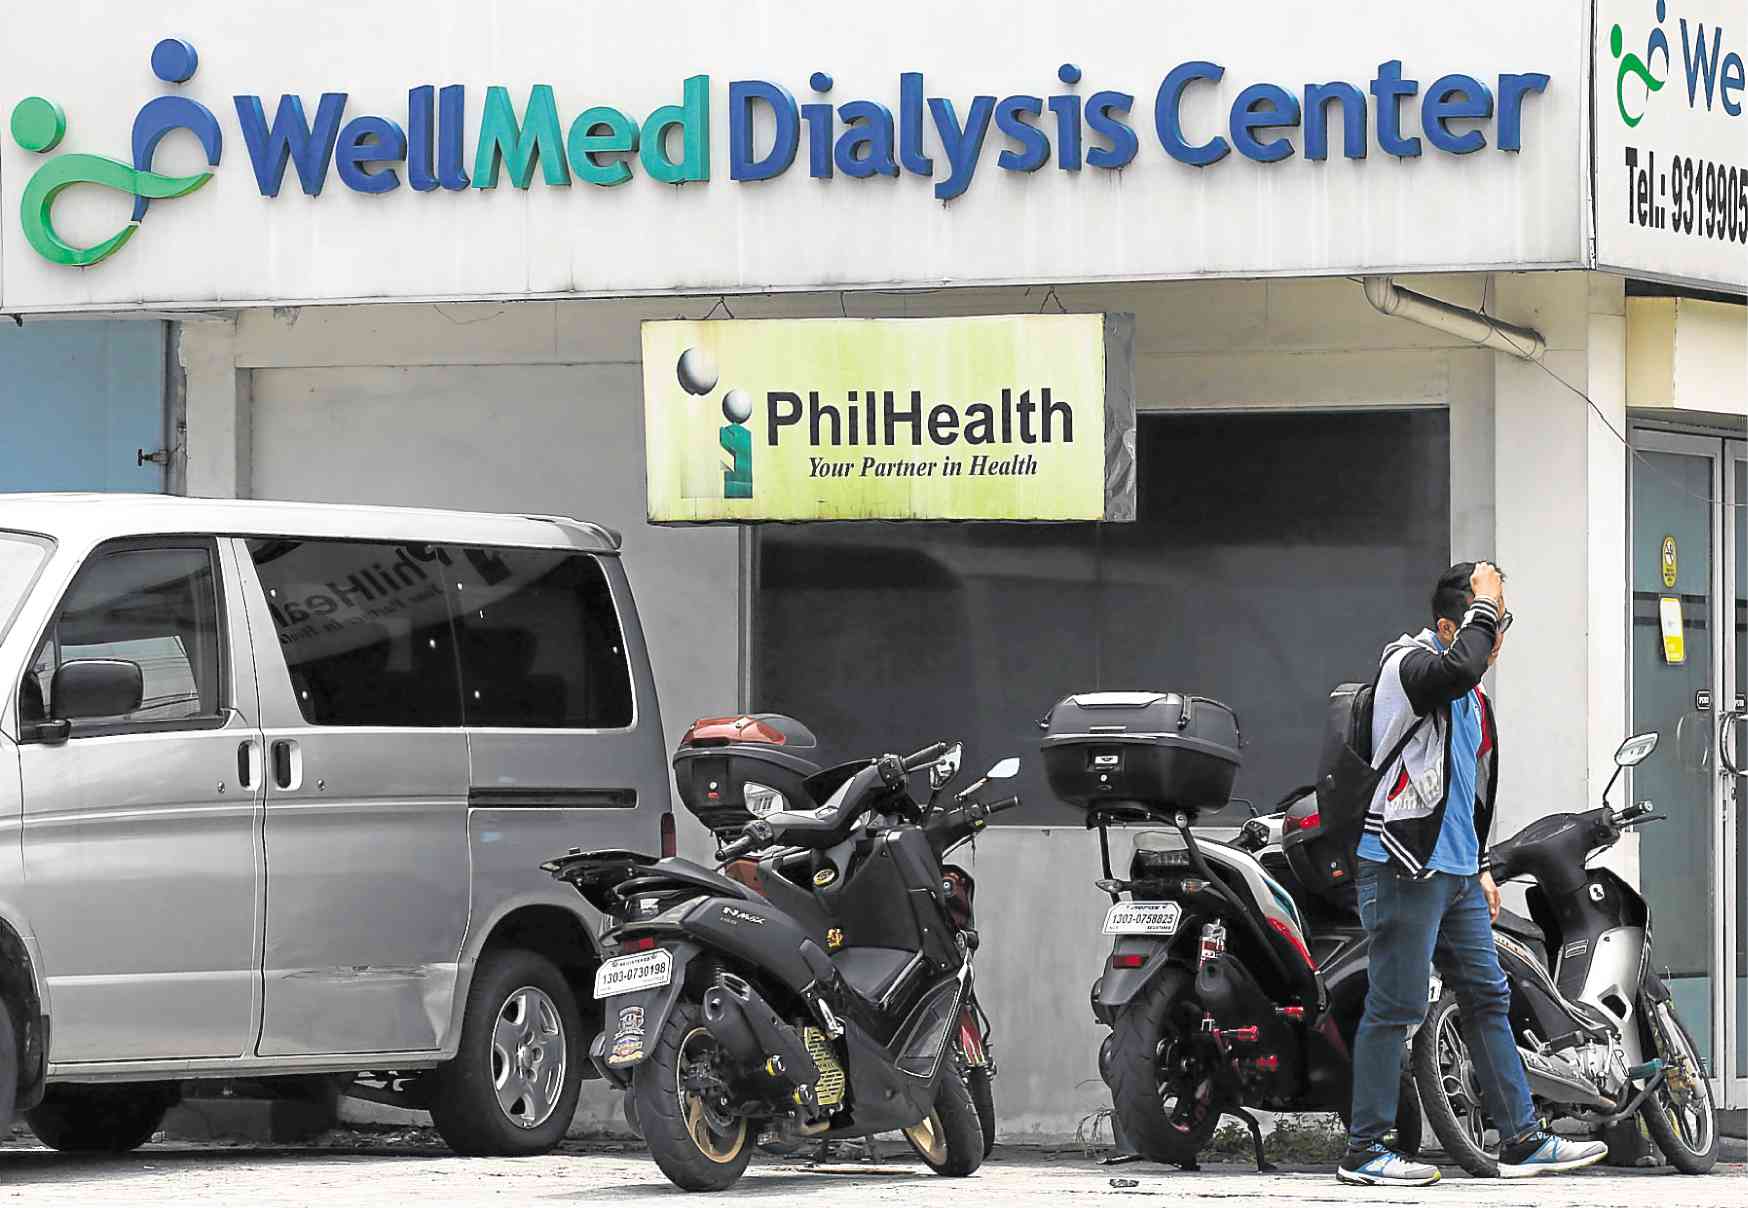 Whistleblower: Dialysis center used loophole to file claims for the dead